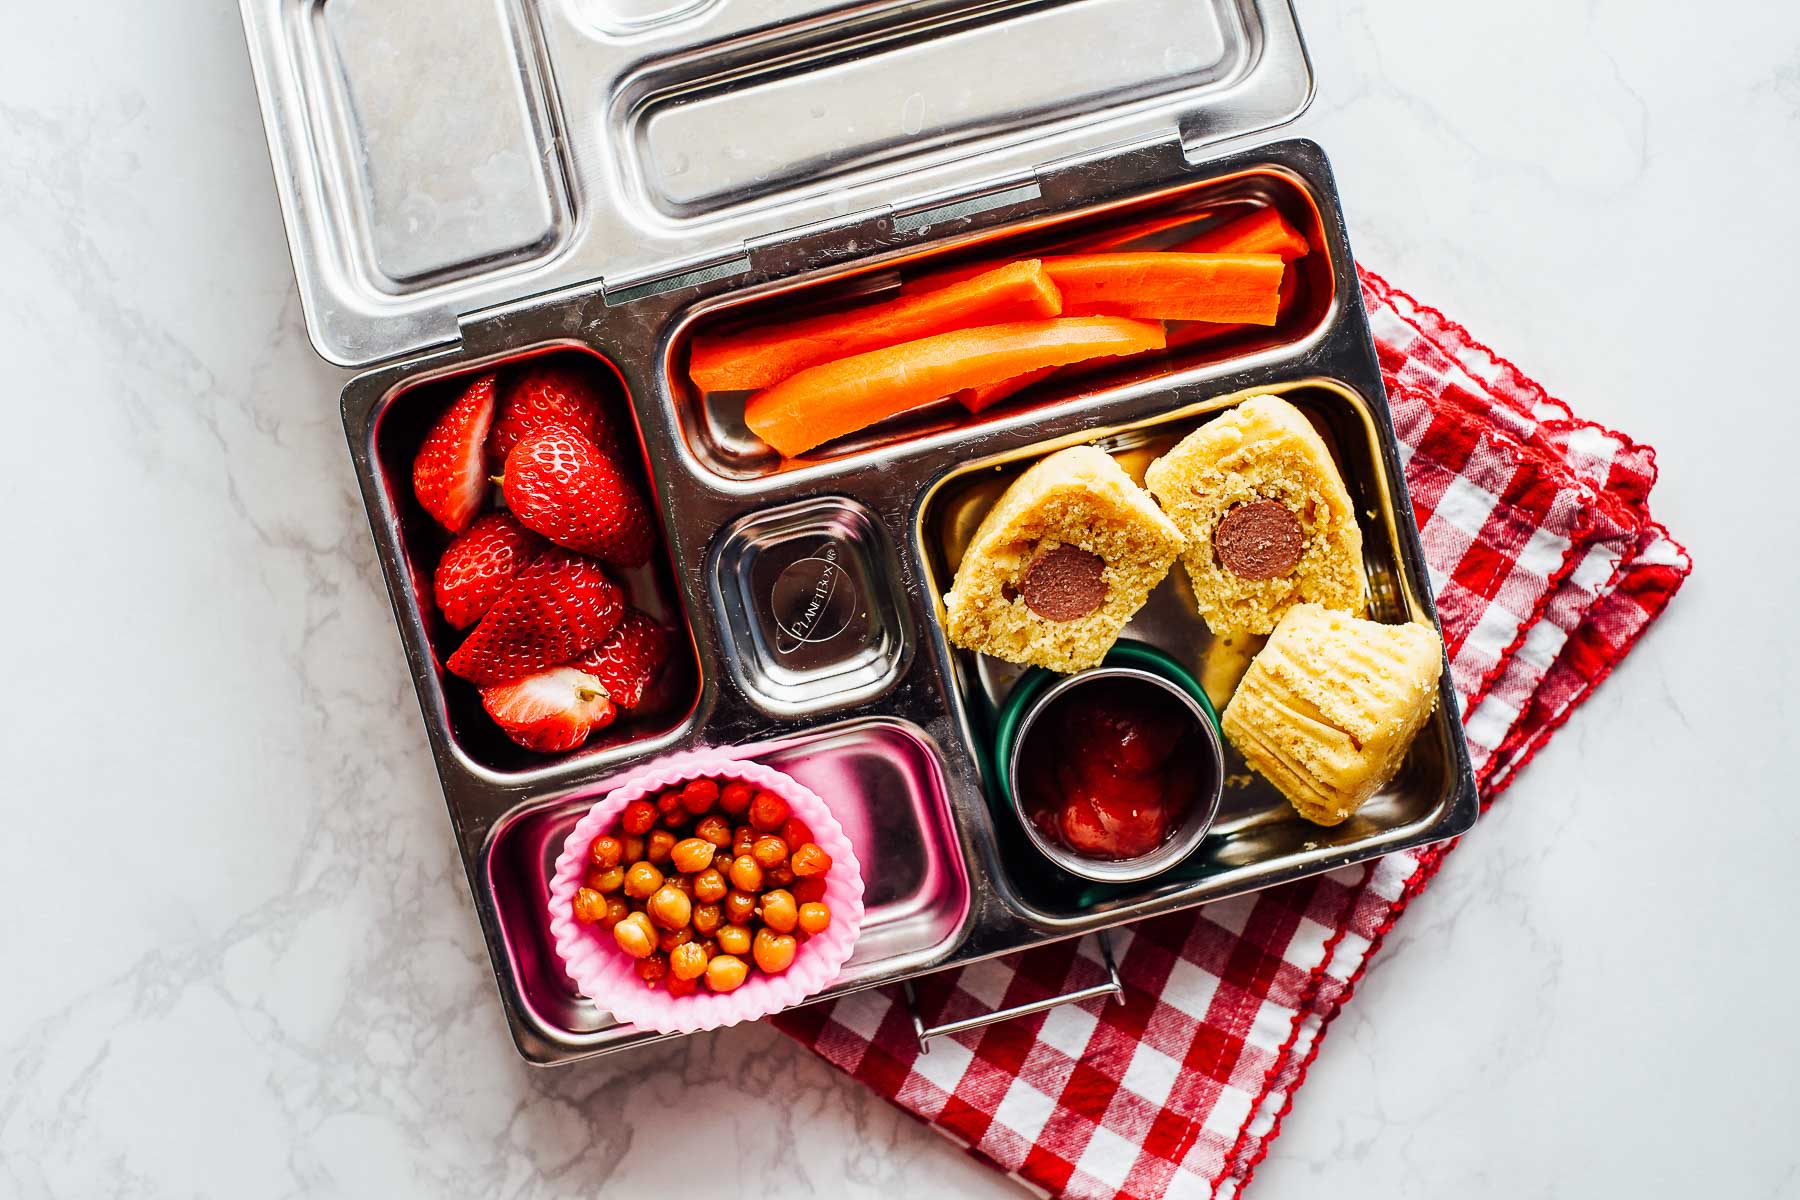 Lunchbox idea: corn dog muffins, crispy chickpeas, carrots, and strawberries.